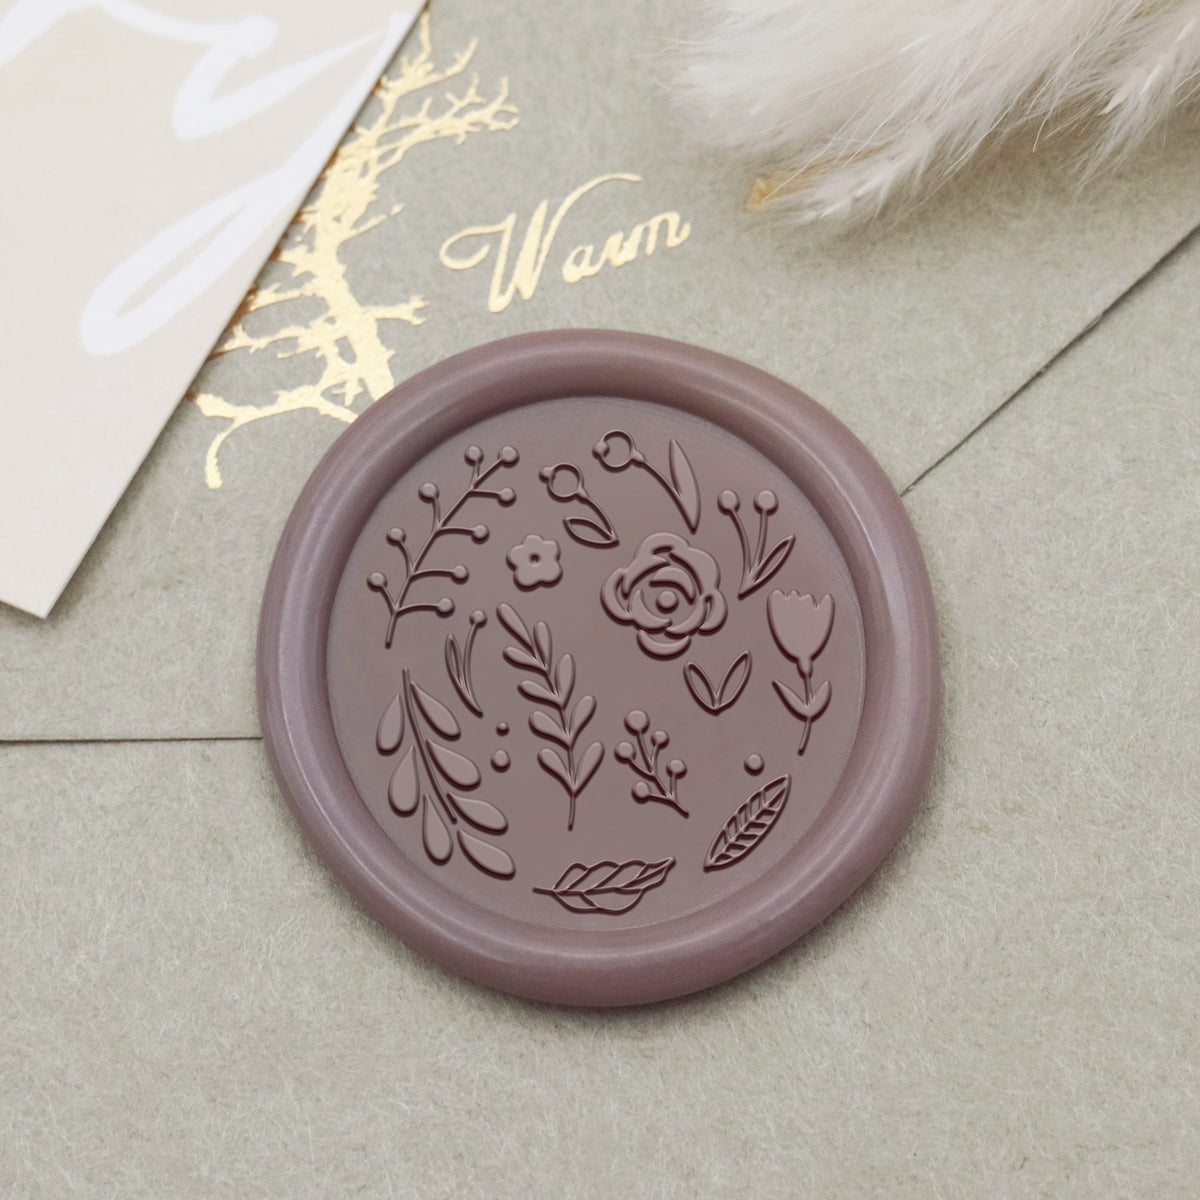 Floral Tile Pattern Wax Seal Stamp - Style 5 1